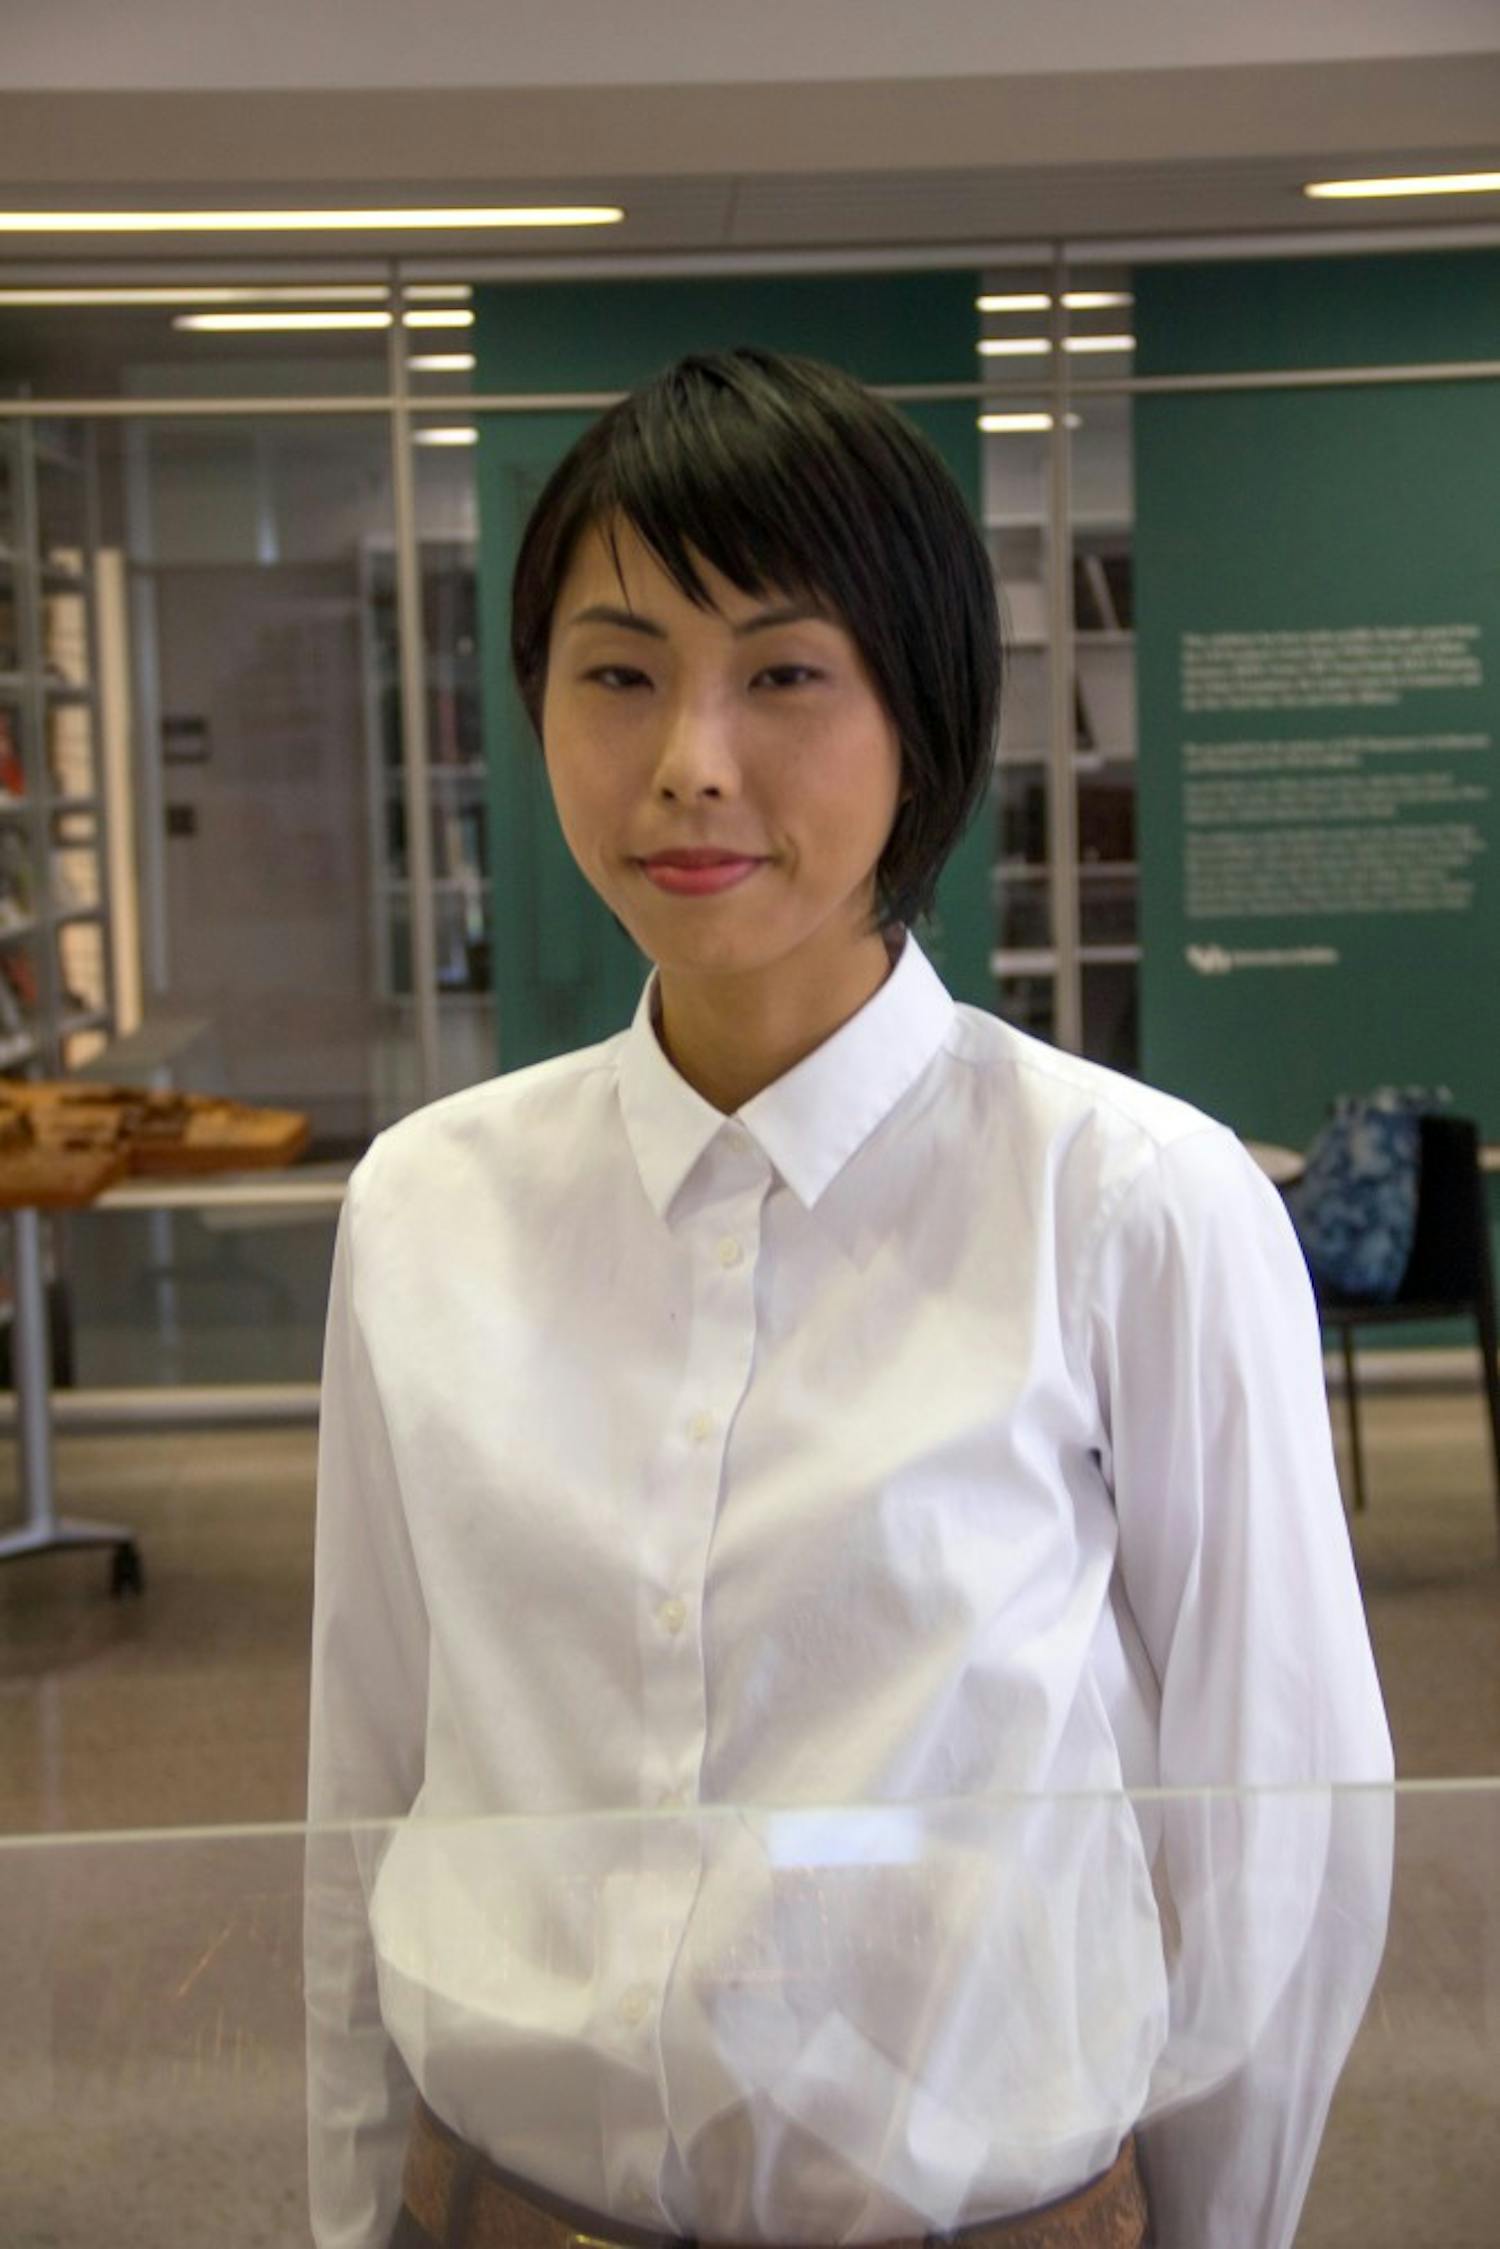 Rima Yamazaki, a Japan-born and New York-based filmmaker, is an artist-in-residence this semester with the UB Creative Arts Initiative (CAI). Yamazaki, whose work has been featured around the world, will be filming architectural structures throughout the city of Buffalo for her upcoming project.